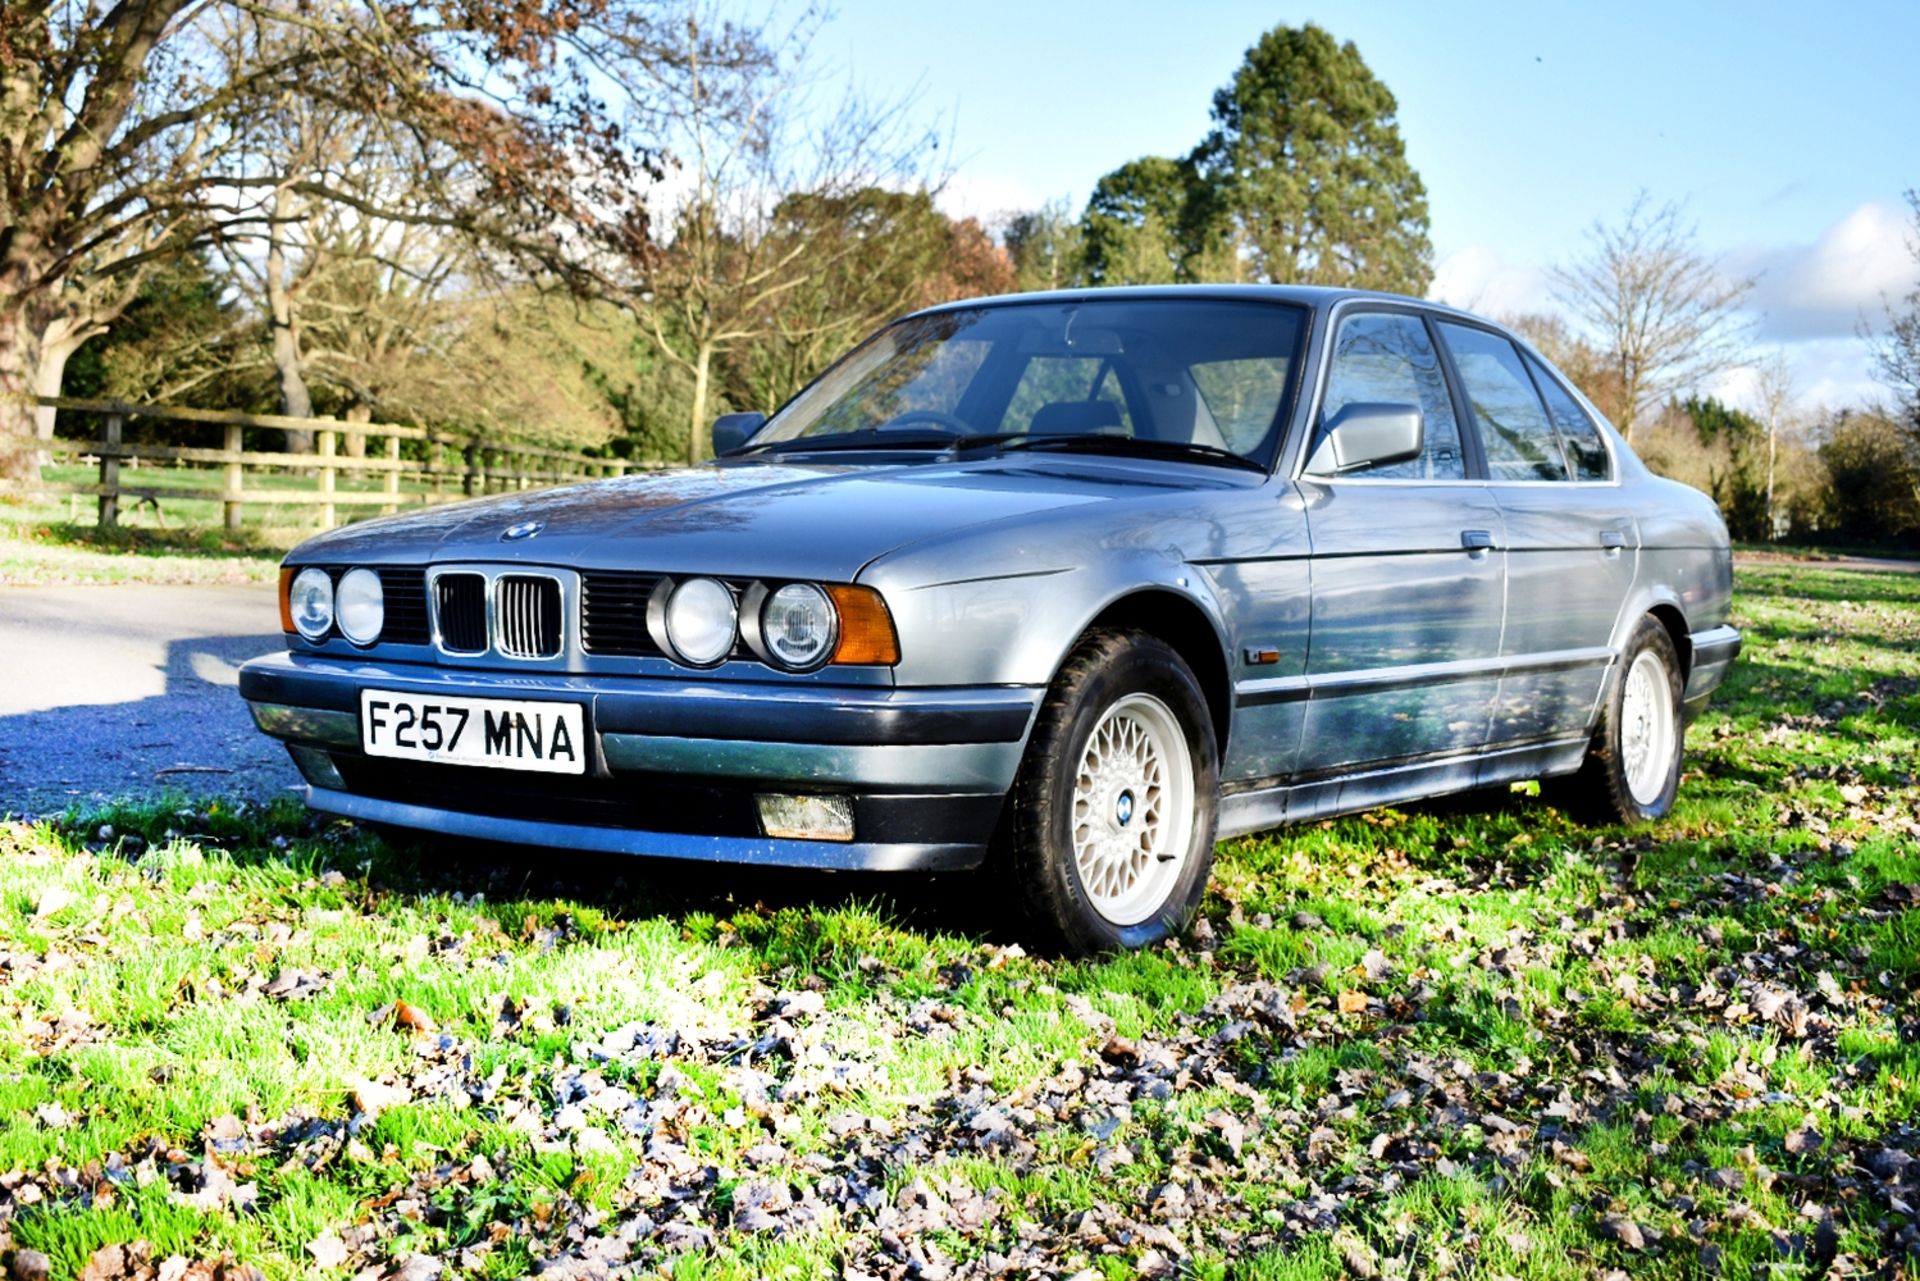 1989 BMW 530i Saloon Chassis no. WBAHC52060BE47229